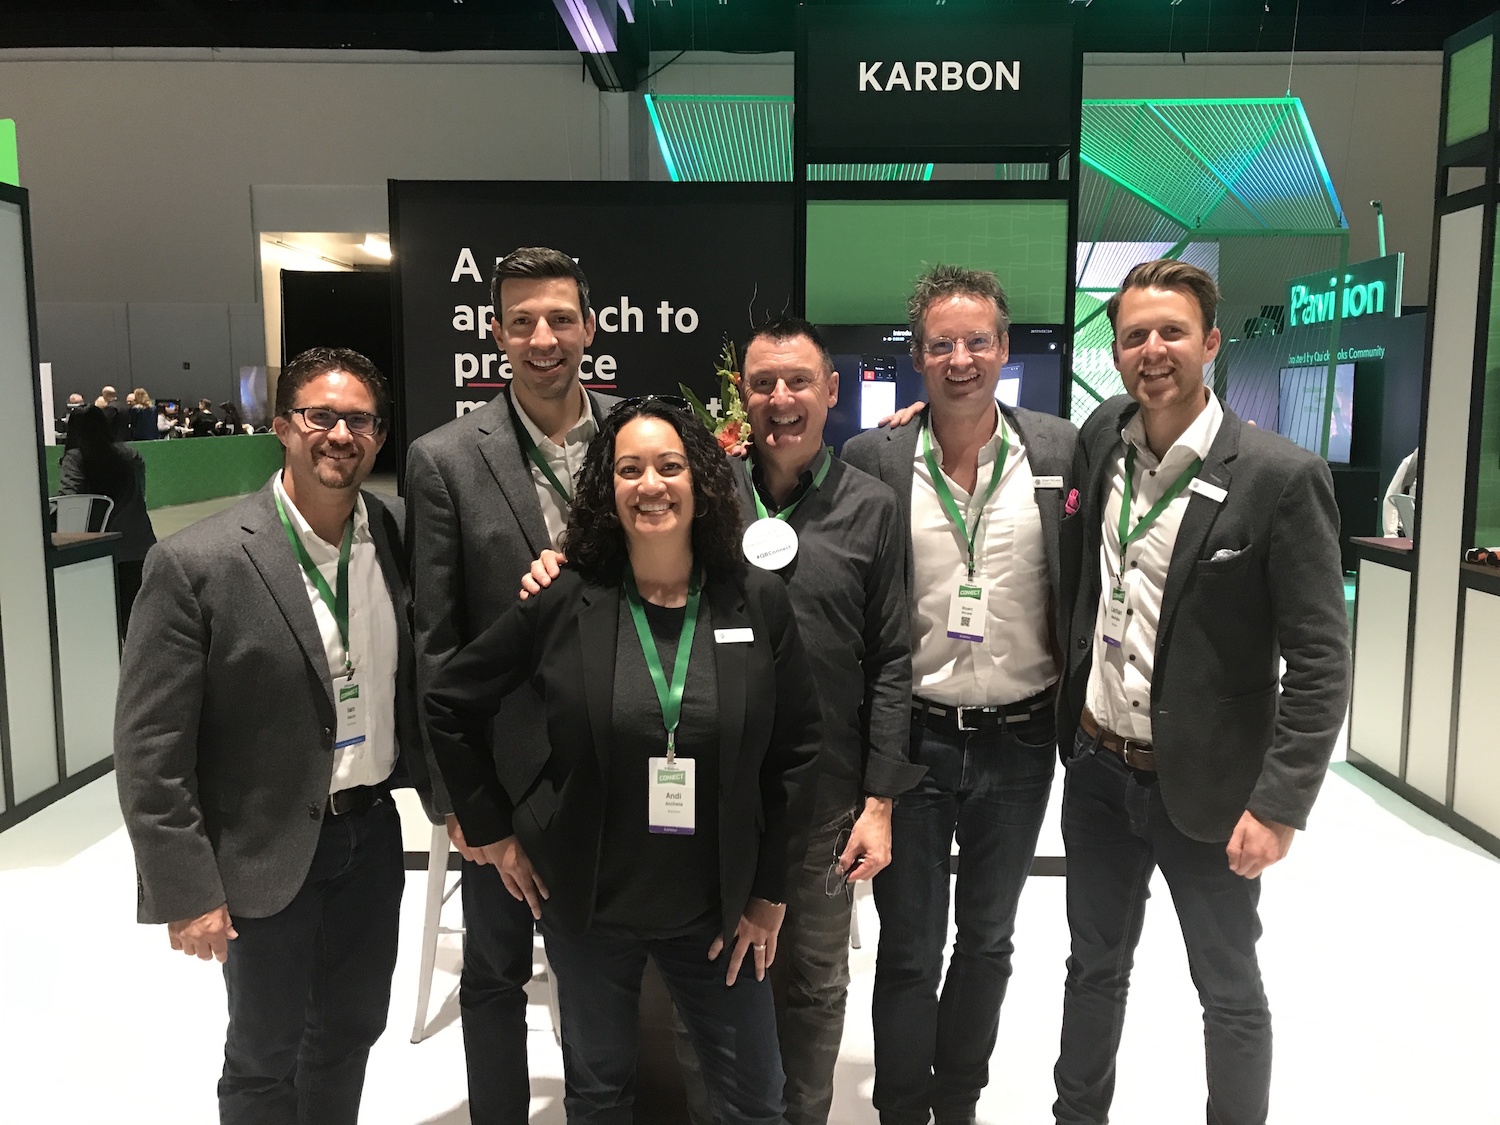 The Karbon team in 2017 at QB Connect